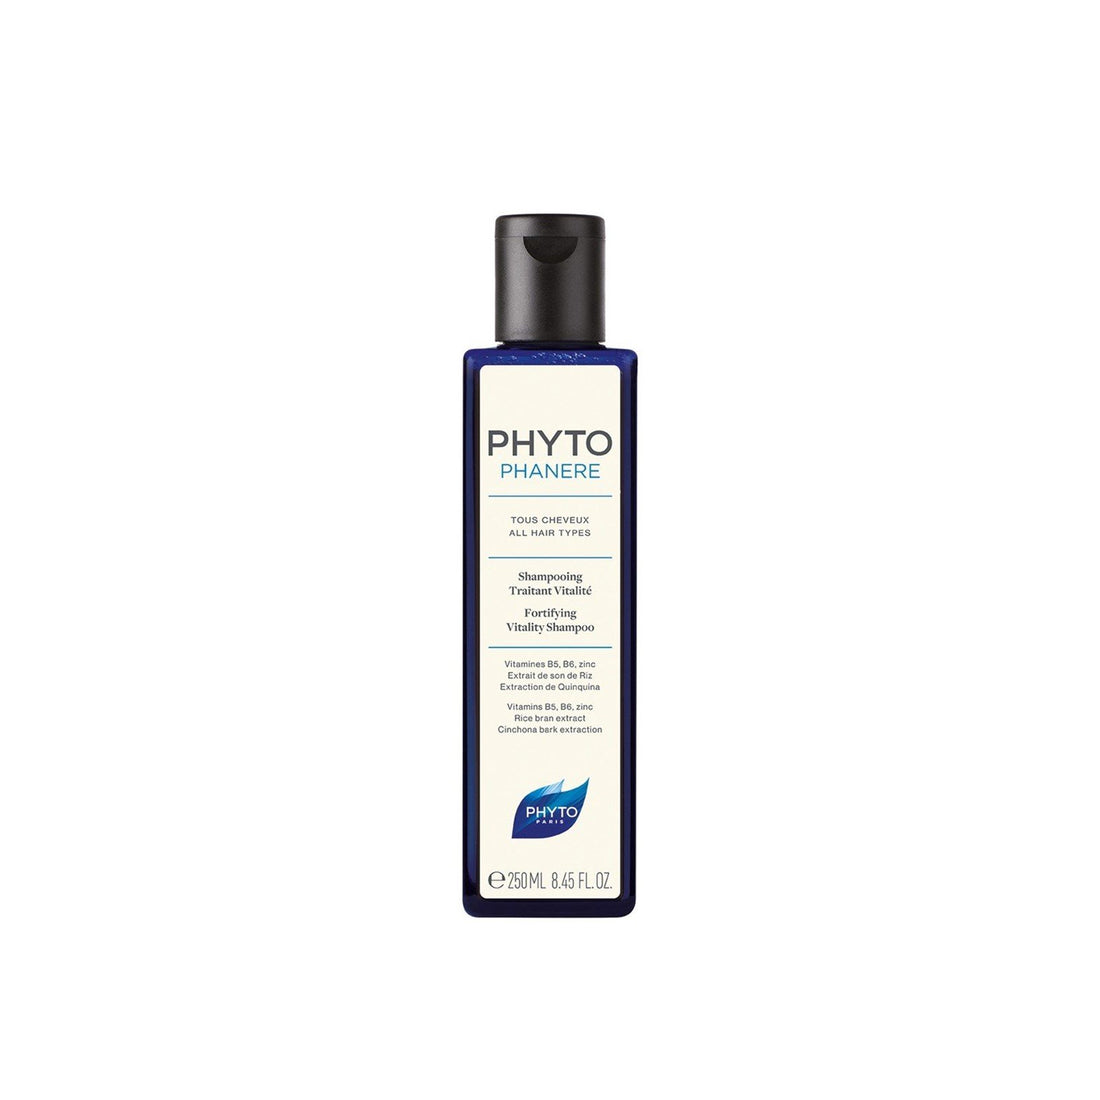 Phytophanere Shampoing Fortifiant Vitalité 250 ml